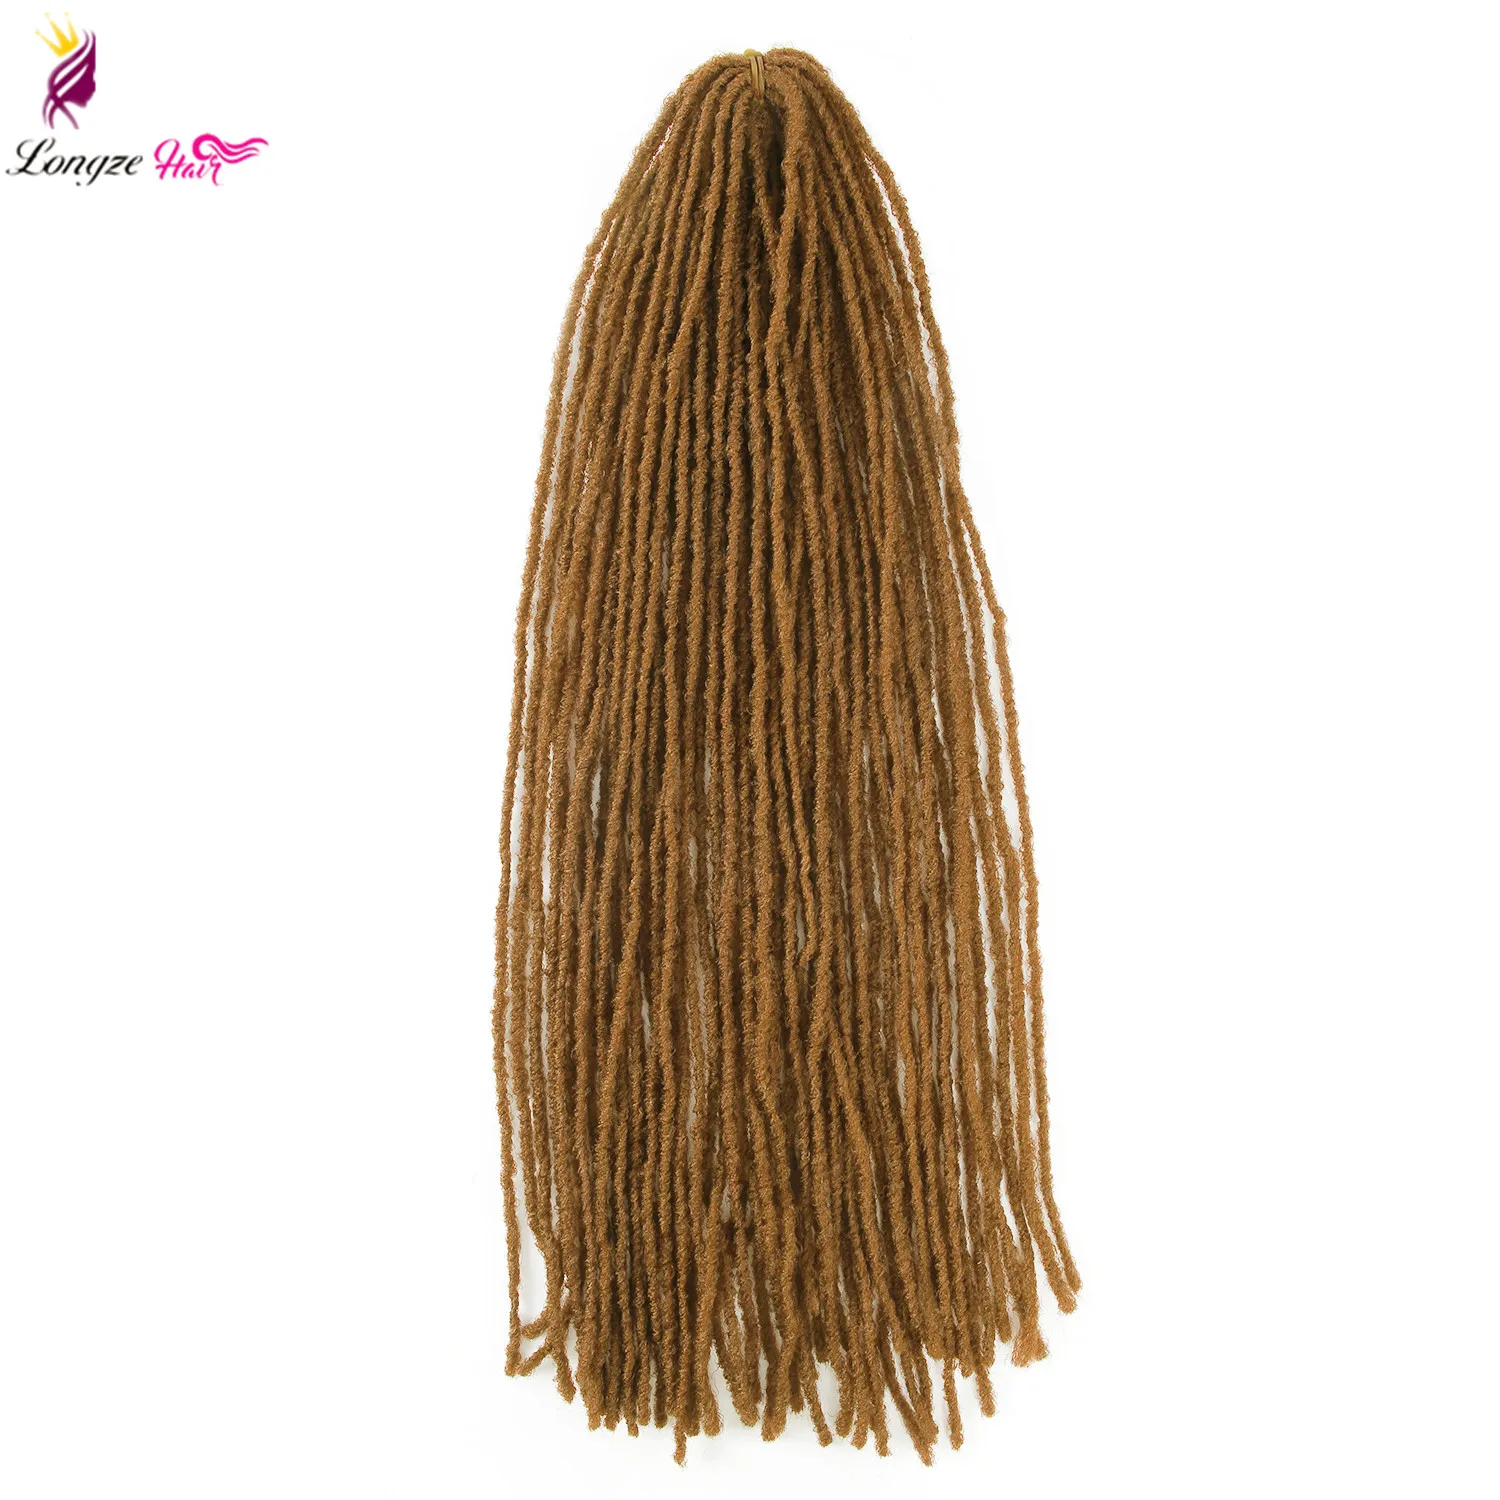 

Sister Locks Afro Crochet Braids Ombre or Pure Color 18 Inch Blonde Brown Bug Synthetic Hair for Women Faux Locs Crochet Hair, #1,#1b,#2,black,#27,#8,#10,bug,#350,#144